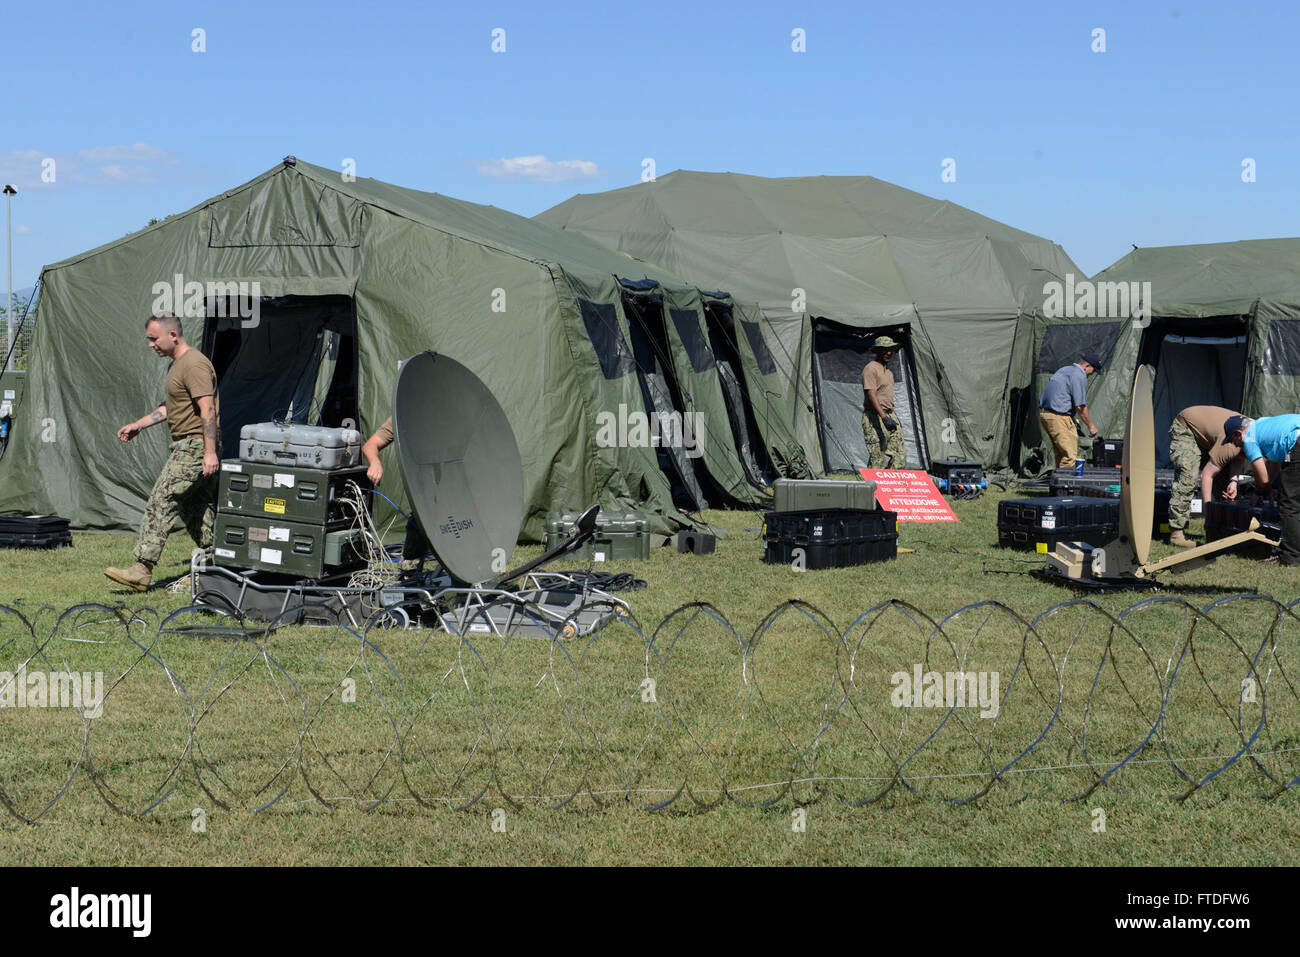 150921-N-UE250-070 GRICIGNANO, Italy (Sept. 21, 2015) Sailors assigned to Commander, Naval Forces Europe Det. Maritime Ashore Support Team (MAST) set up their mobile command center on U.S. Naval Support Activity Naples, Italy Sept. 21, 2015. MAST is currently conducting a Continuity of Operations Planning and crisis management field training exercise. (U.S. Navy photo by Mass Communication Specialist 2nd Class Corey Hensley/Released) Stock Photo